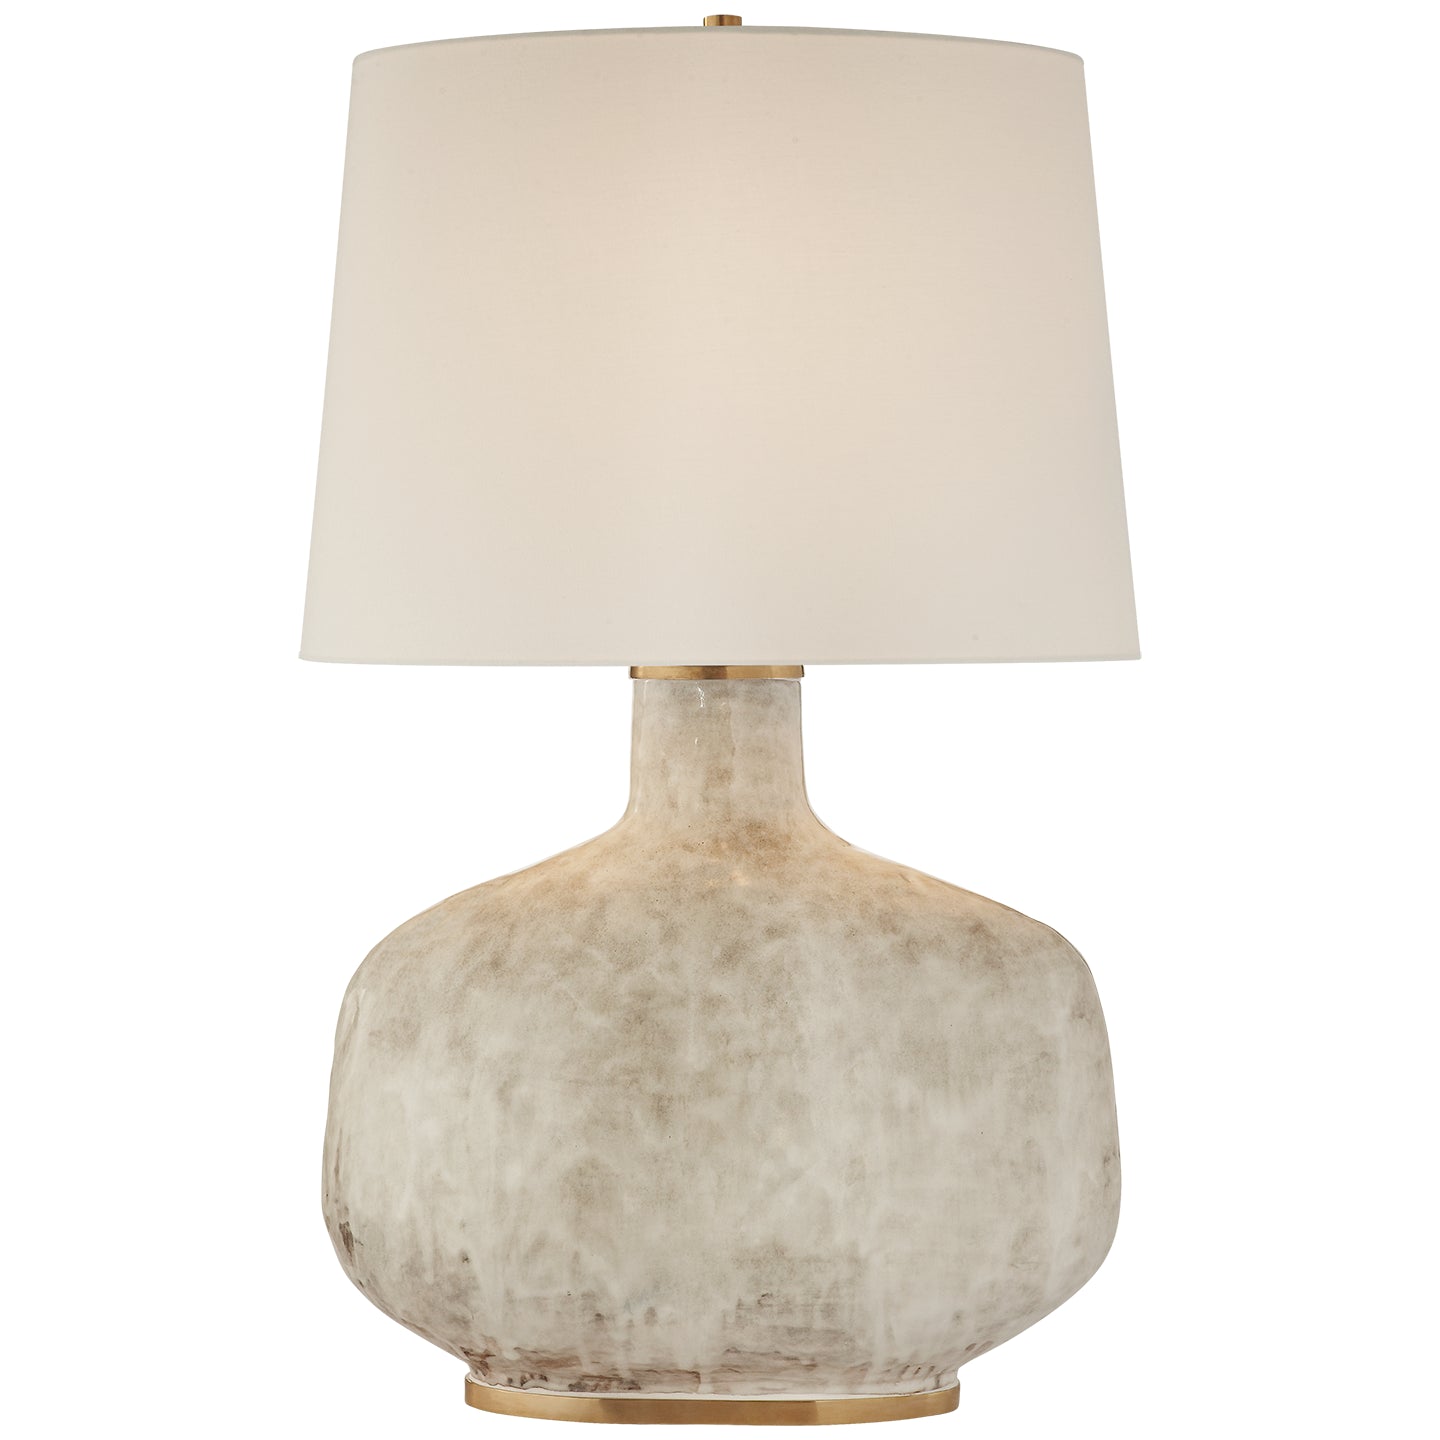 Load image into Gallery viewer, Visual Comfort Signature - KW 3614AWC-L - One Light Table Lamp - Beton - Antiqued White Ceramic
